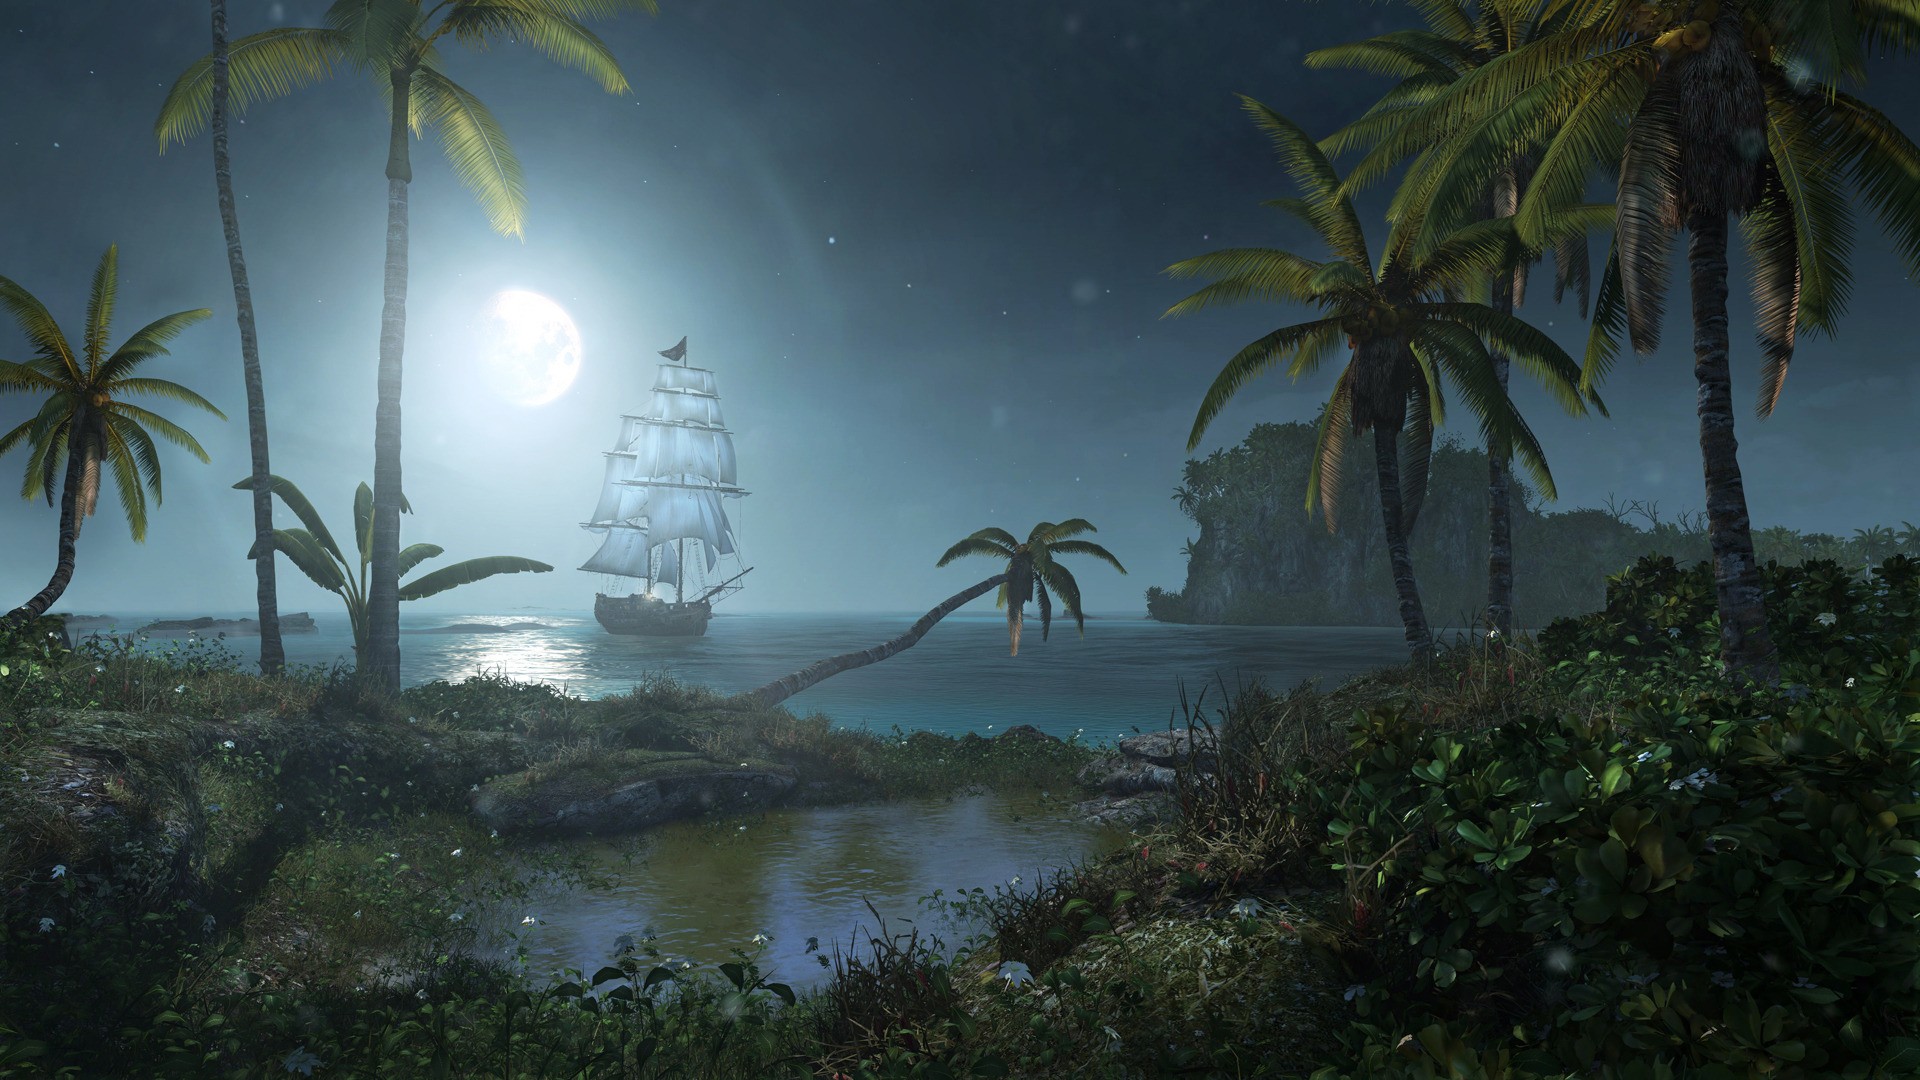 General 1920x1080 Assassin's Creed Assassin's Creed: Black Flag pirates digital art video game art moonlight palm trees water plants video games CGI sky night Moon Pirate ship